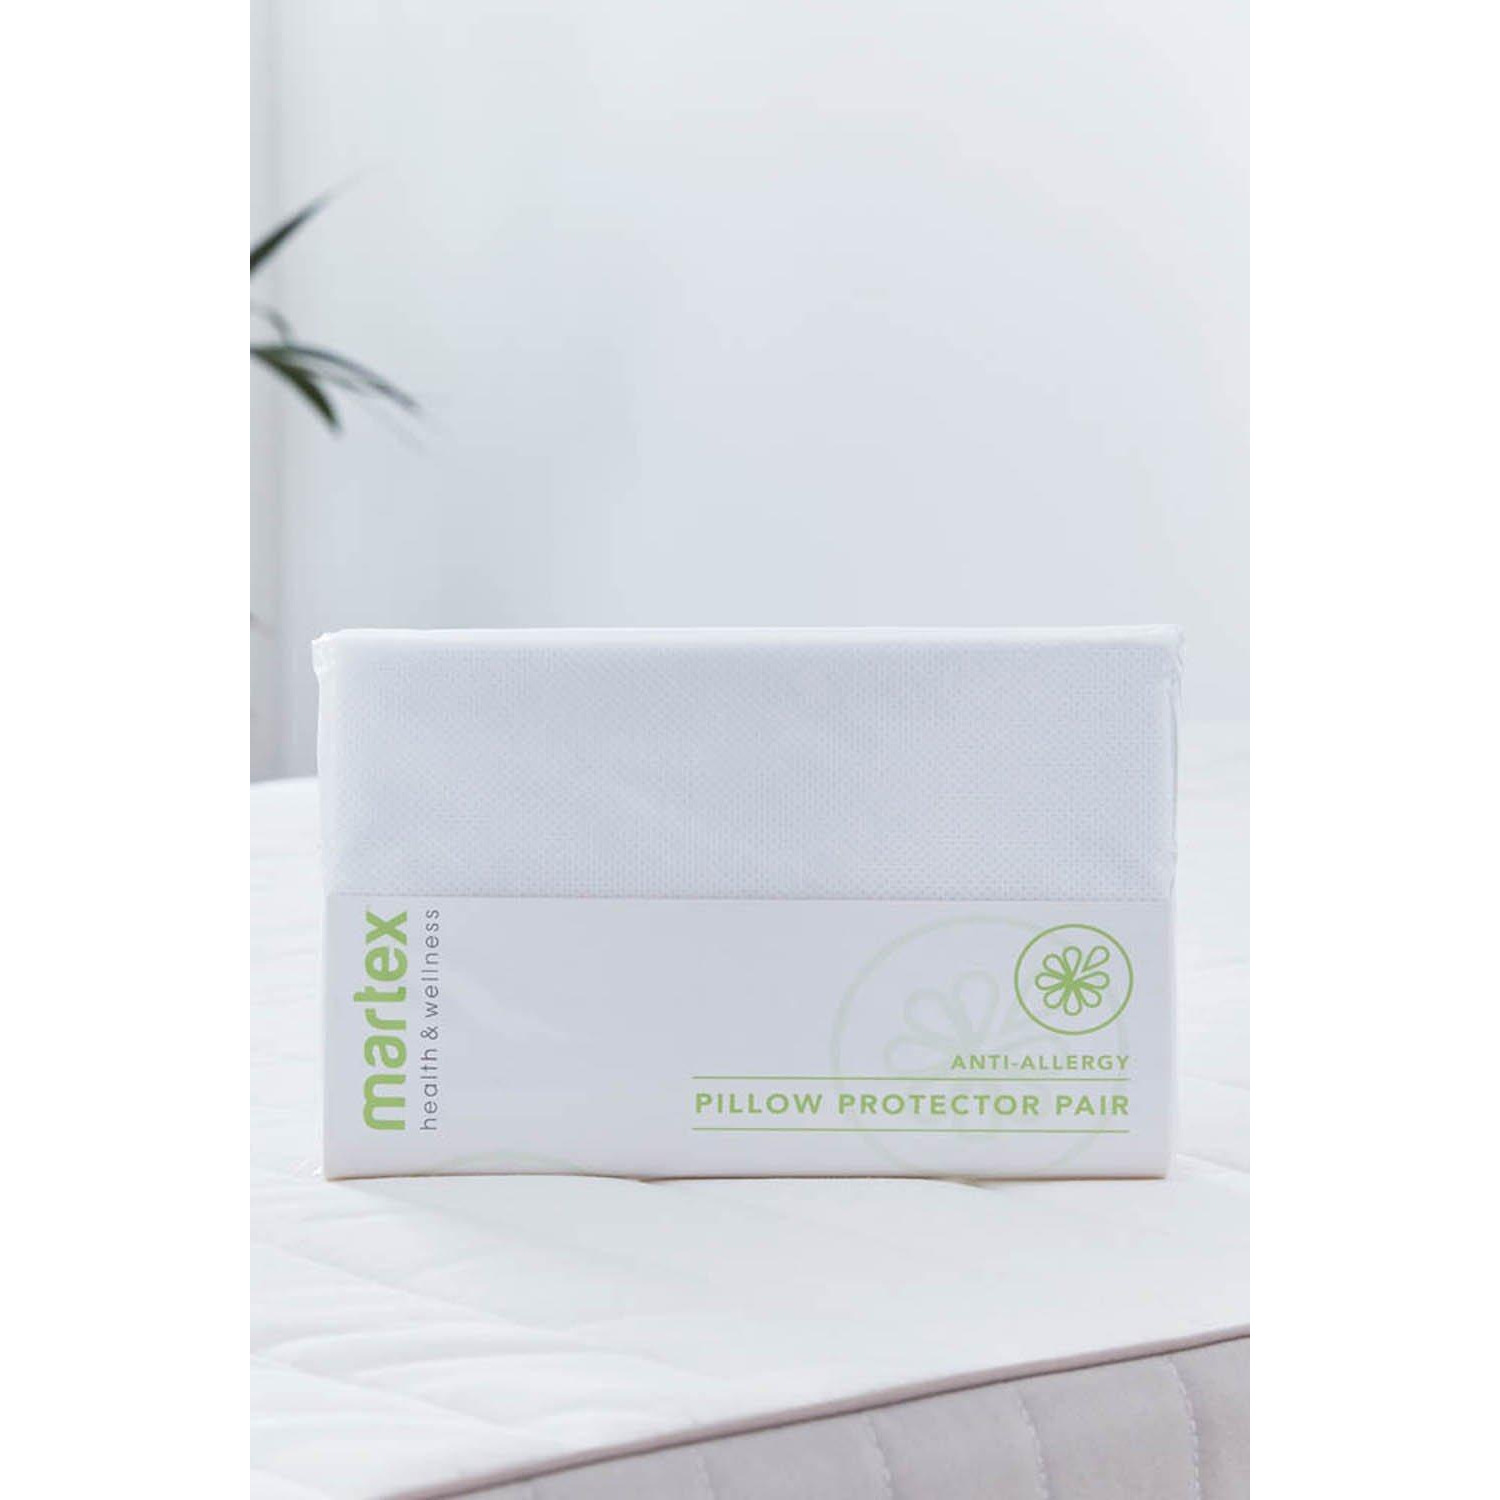 'Health & Wellness' Anti-Allergy Pillow Protectors Pack of 2 - image 1